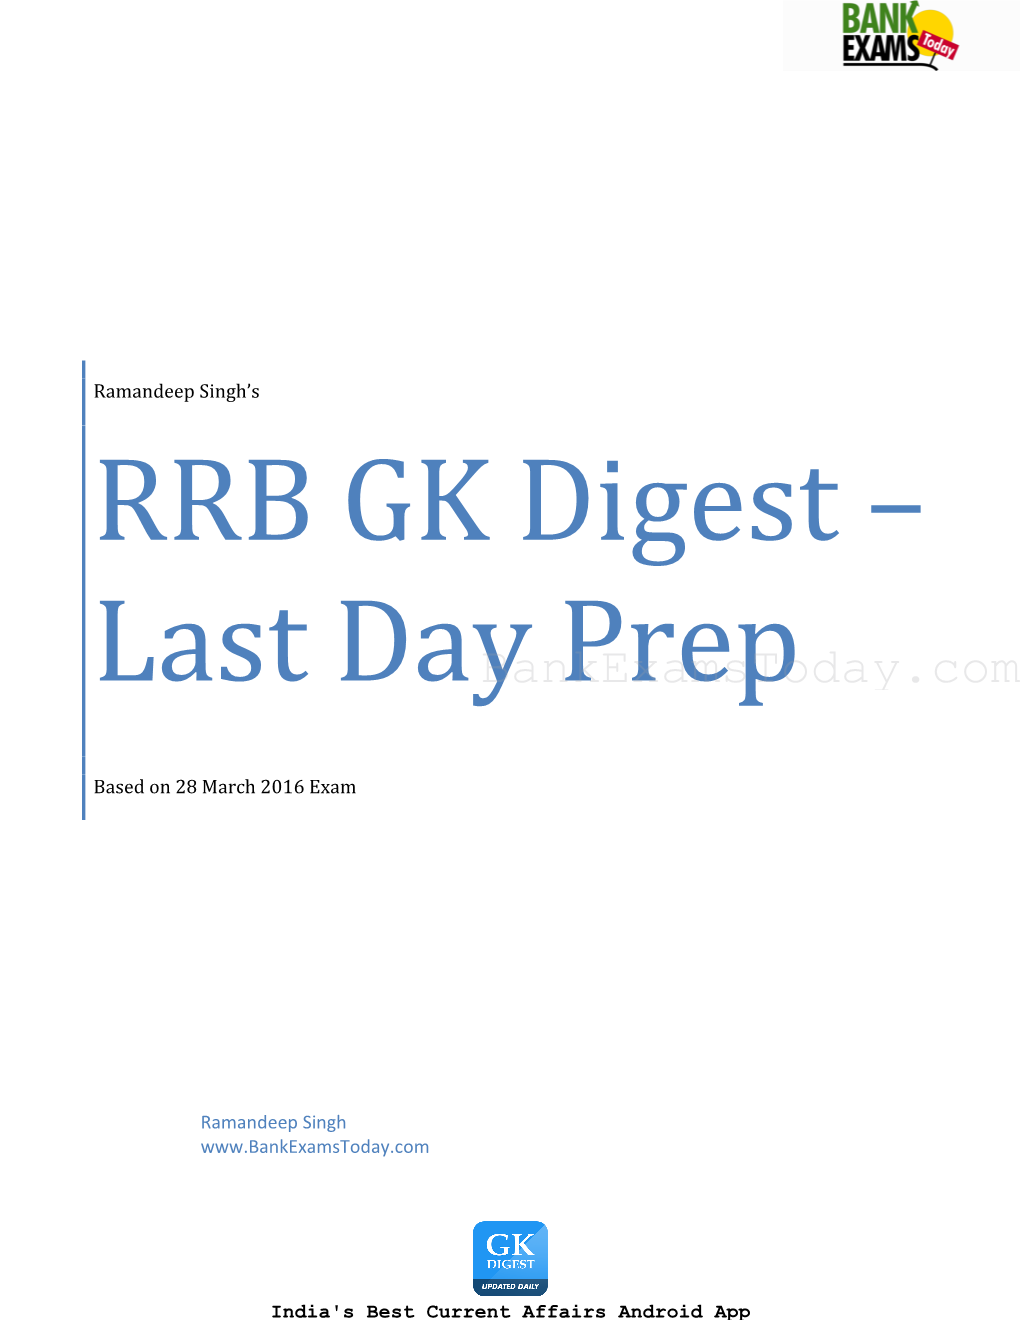 RRB GK Digest – Based on 28 March 2016 Exam Last Day Prep